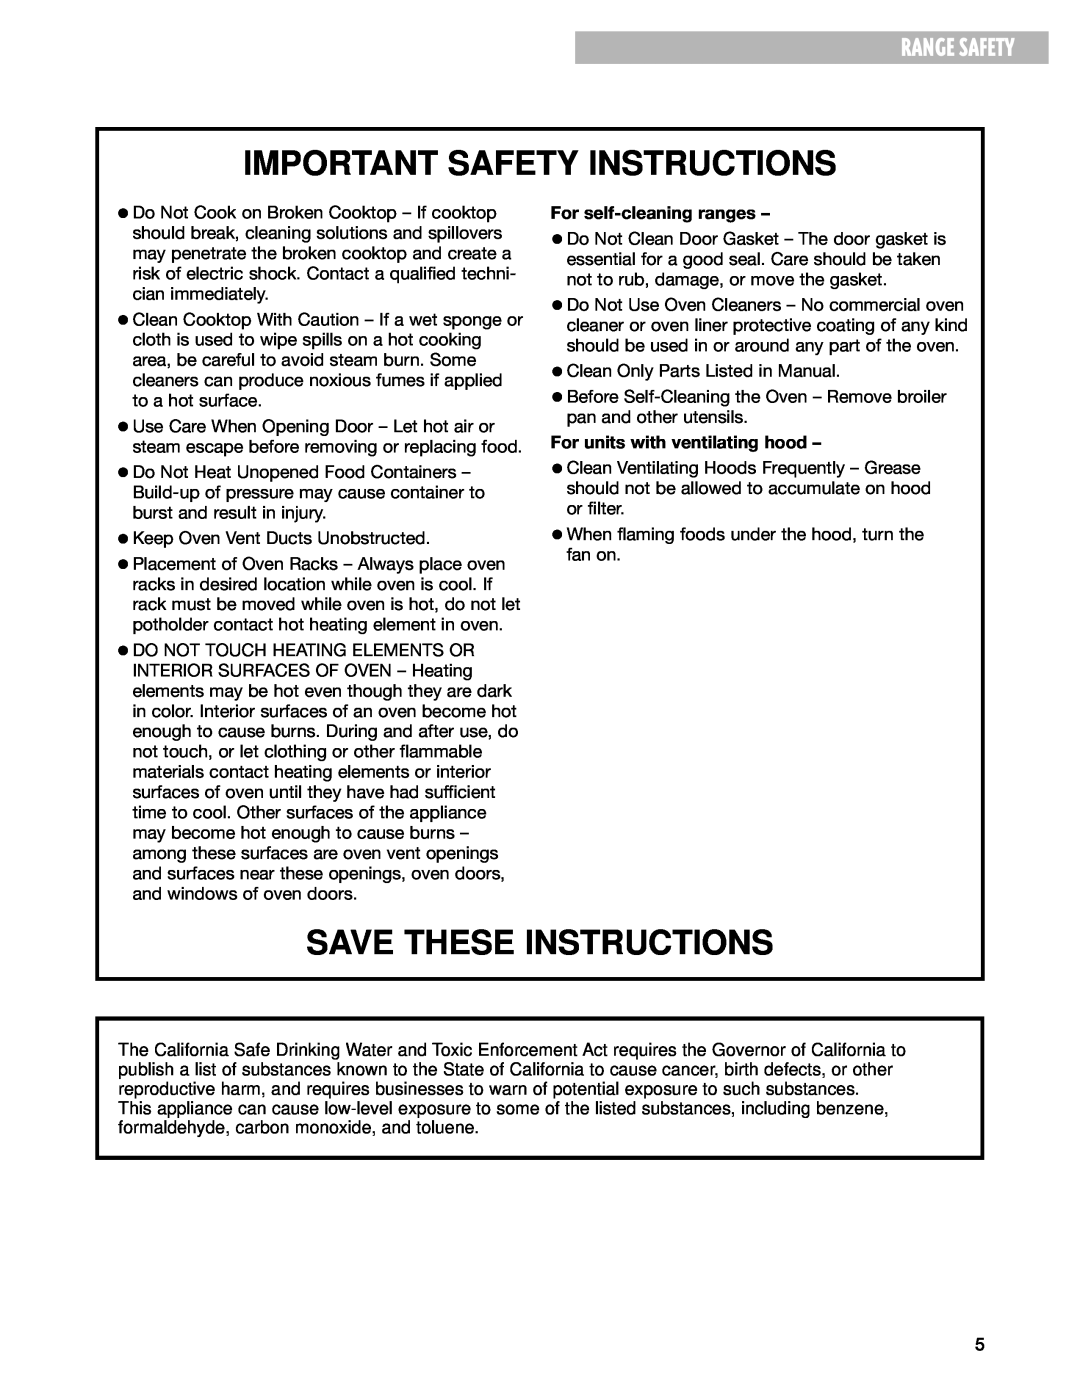 Whirlpool GR395LXG warranty Important Safety Instructions, Save These Instructions, Range Safety, For self-cleaning ranges 